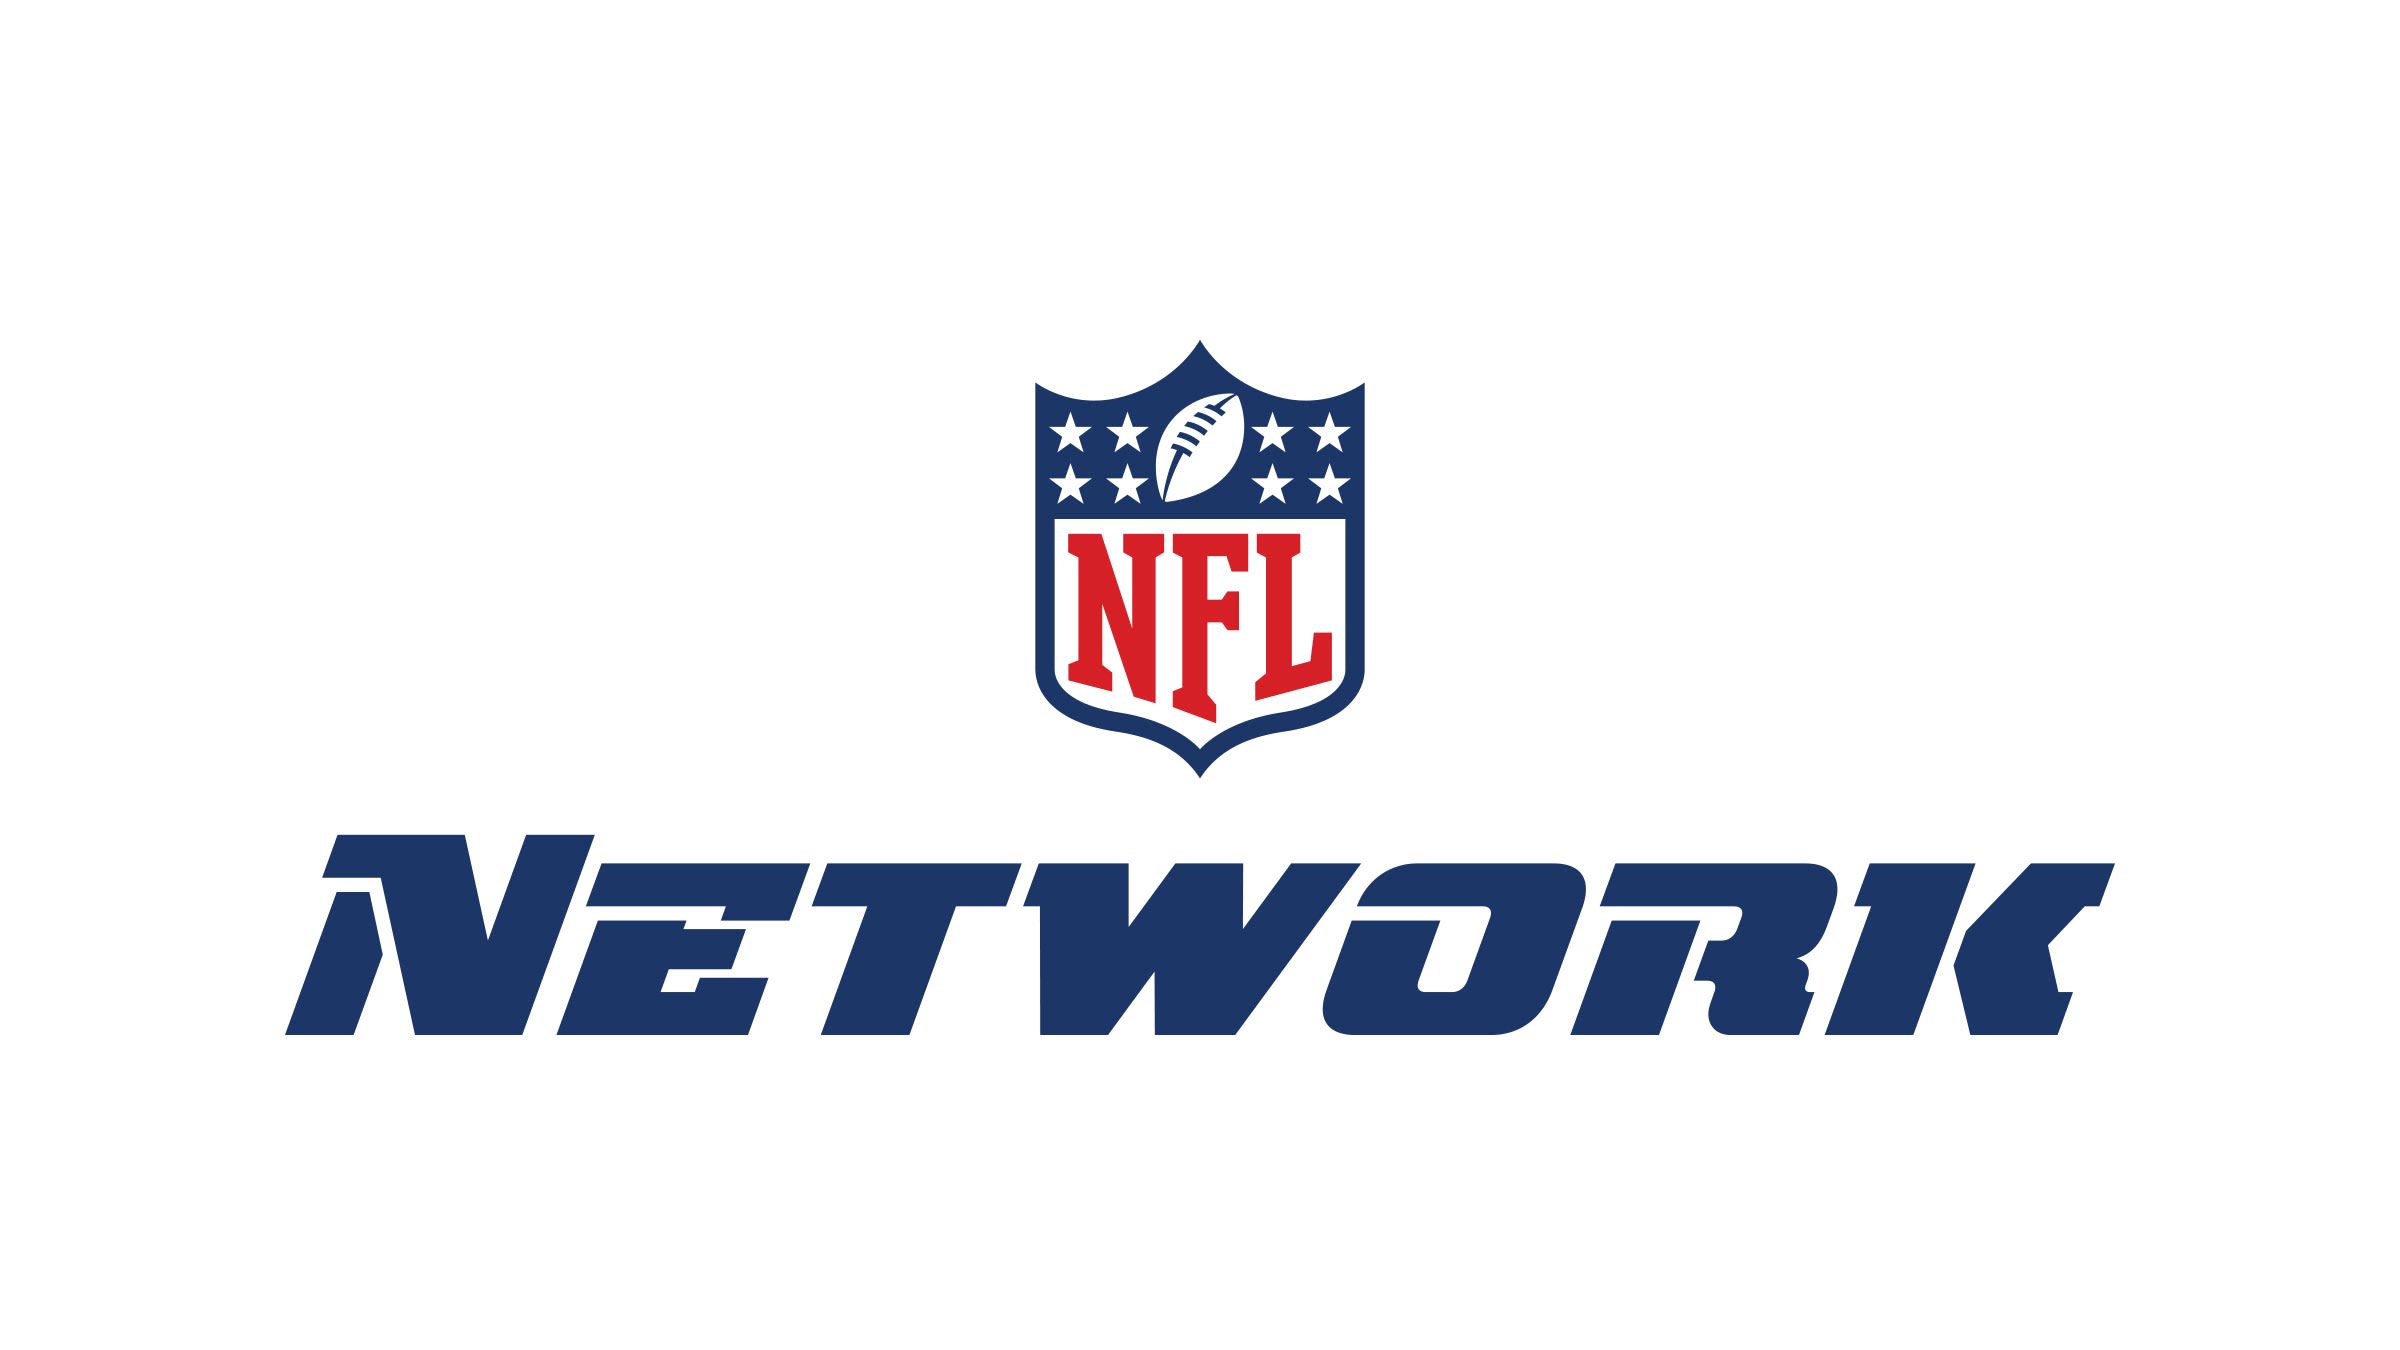 nfl games and networks today